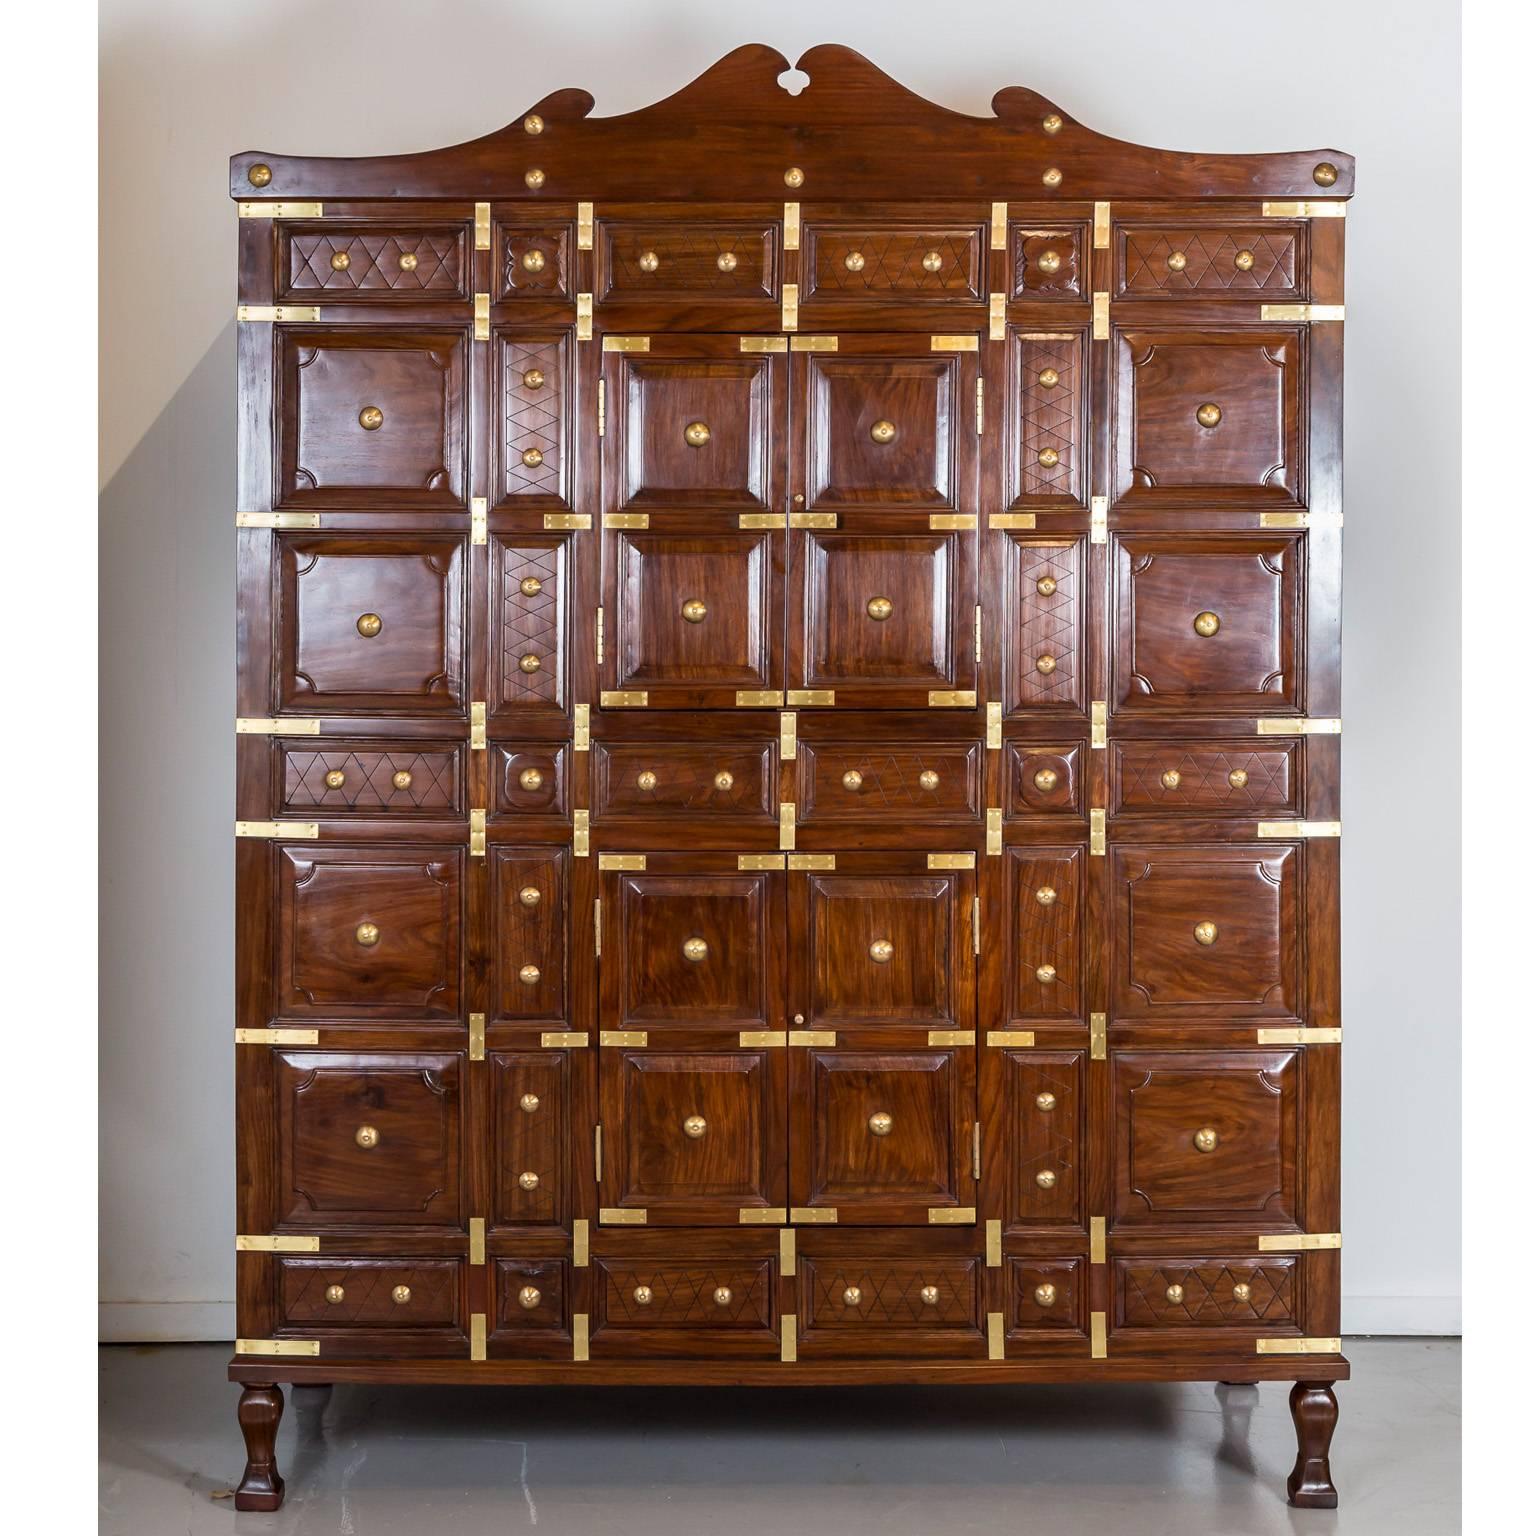 A unique cupboard made of walnut with raised and moulded panels, both decorated and strengthened with brass straps.
It features a serpentine shaped top and four small doors in the middle of the cabinet to give access to the interior. The cupboard